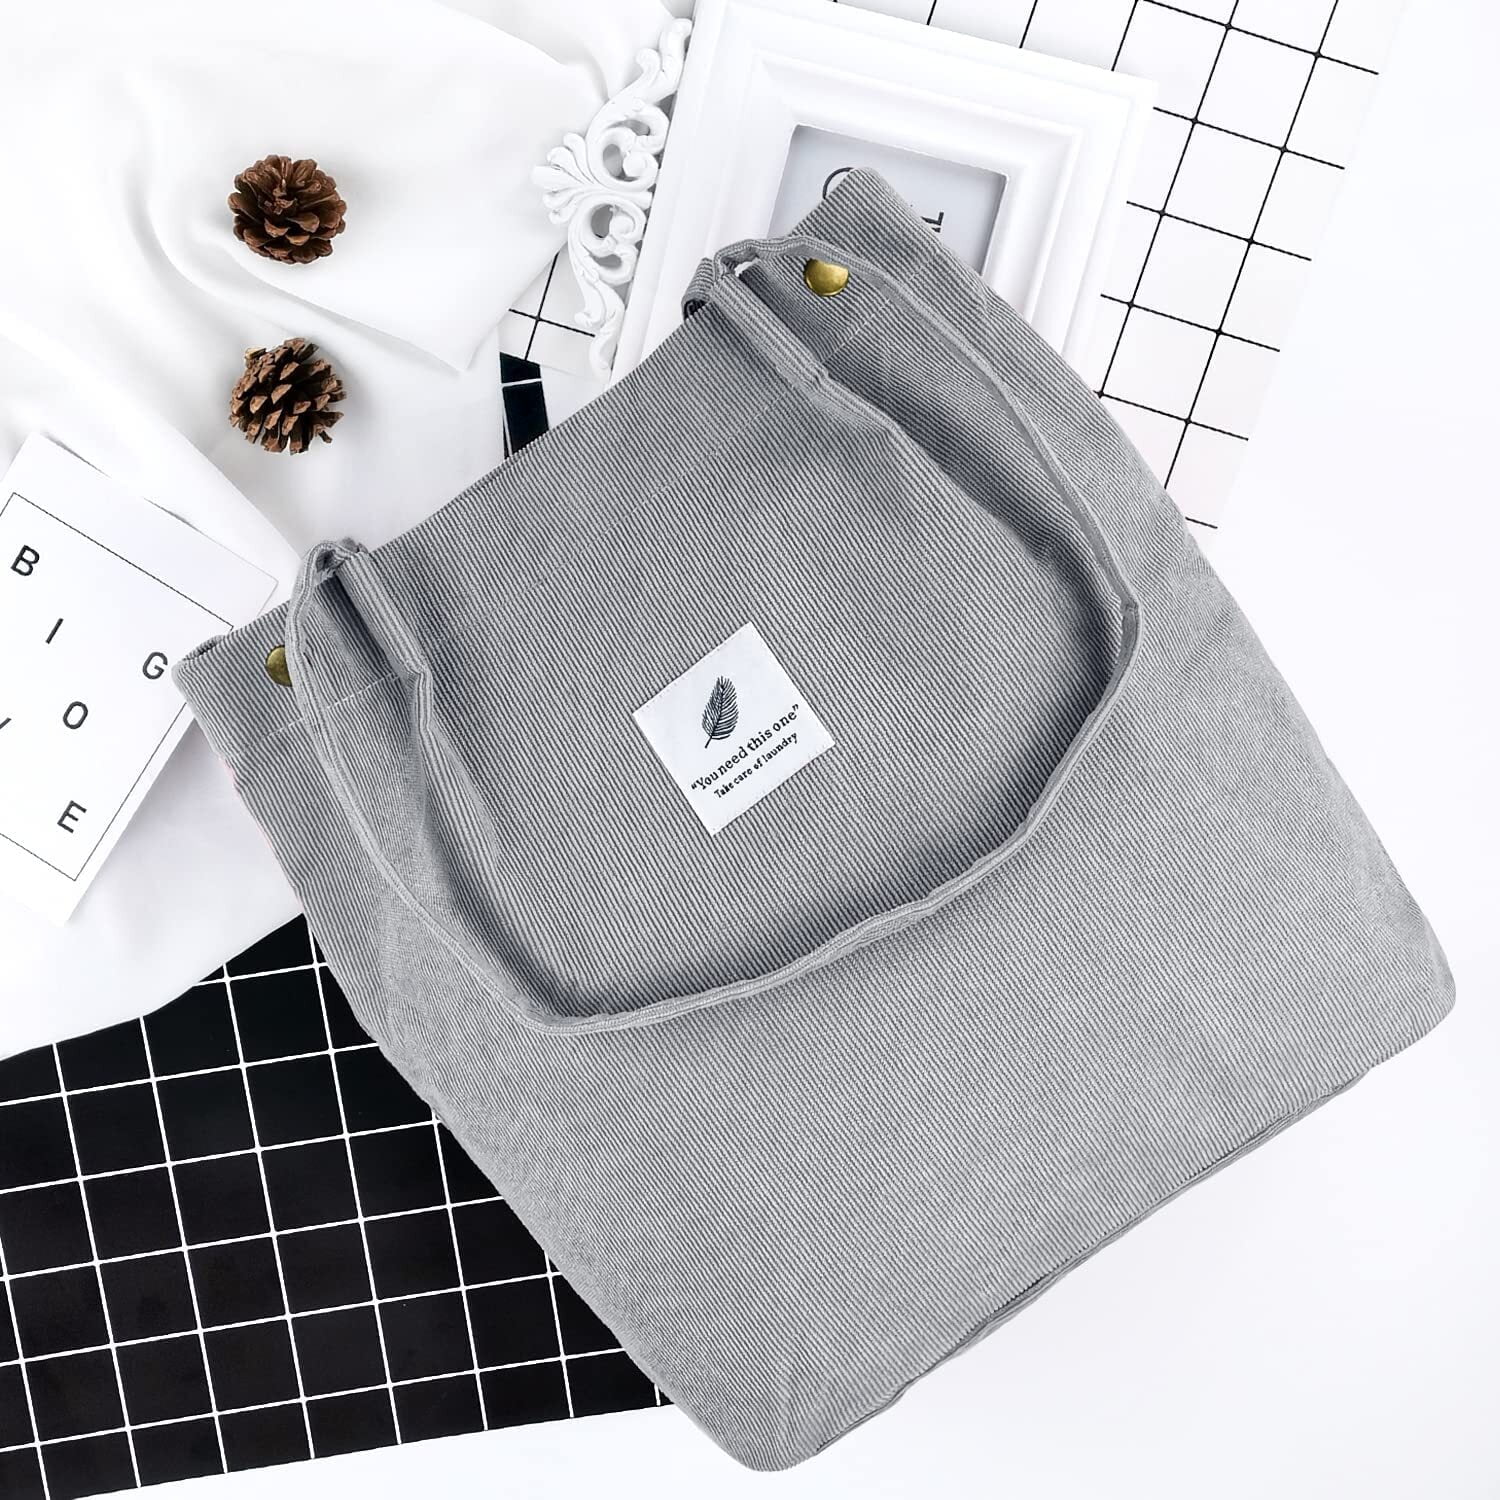 It has so many pockets and can fit so much! 📚 #totebag #totebagaesthe, Tote Bag